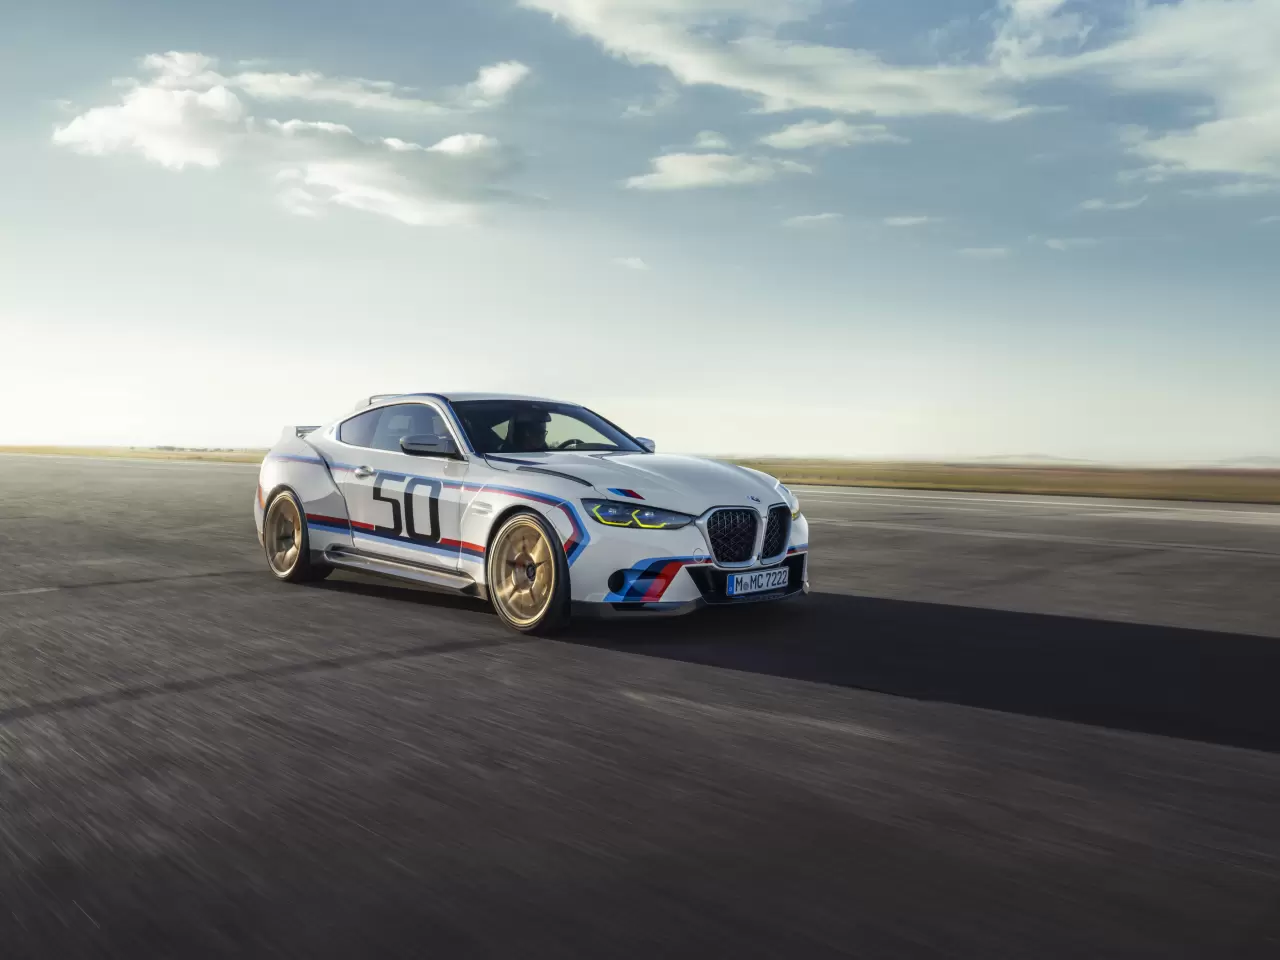 The limited edition 2023 BMW 3.0 CSL